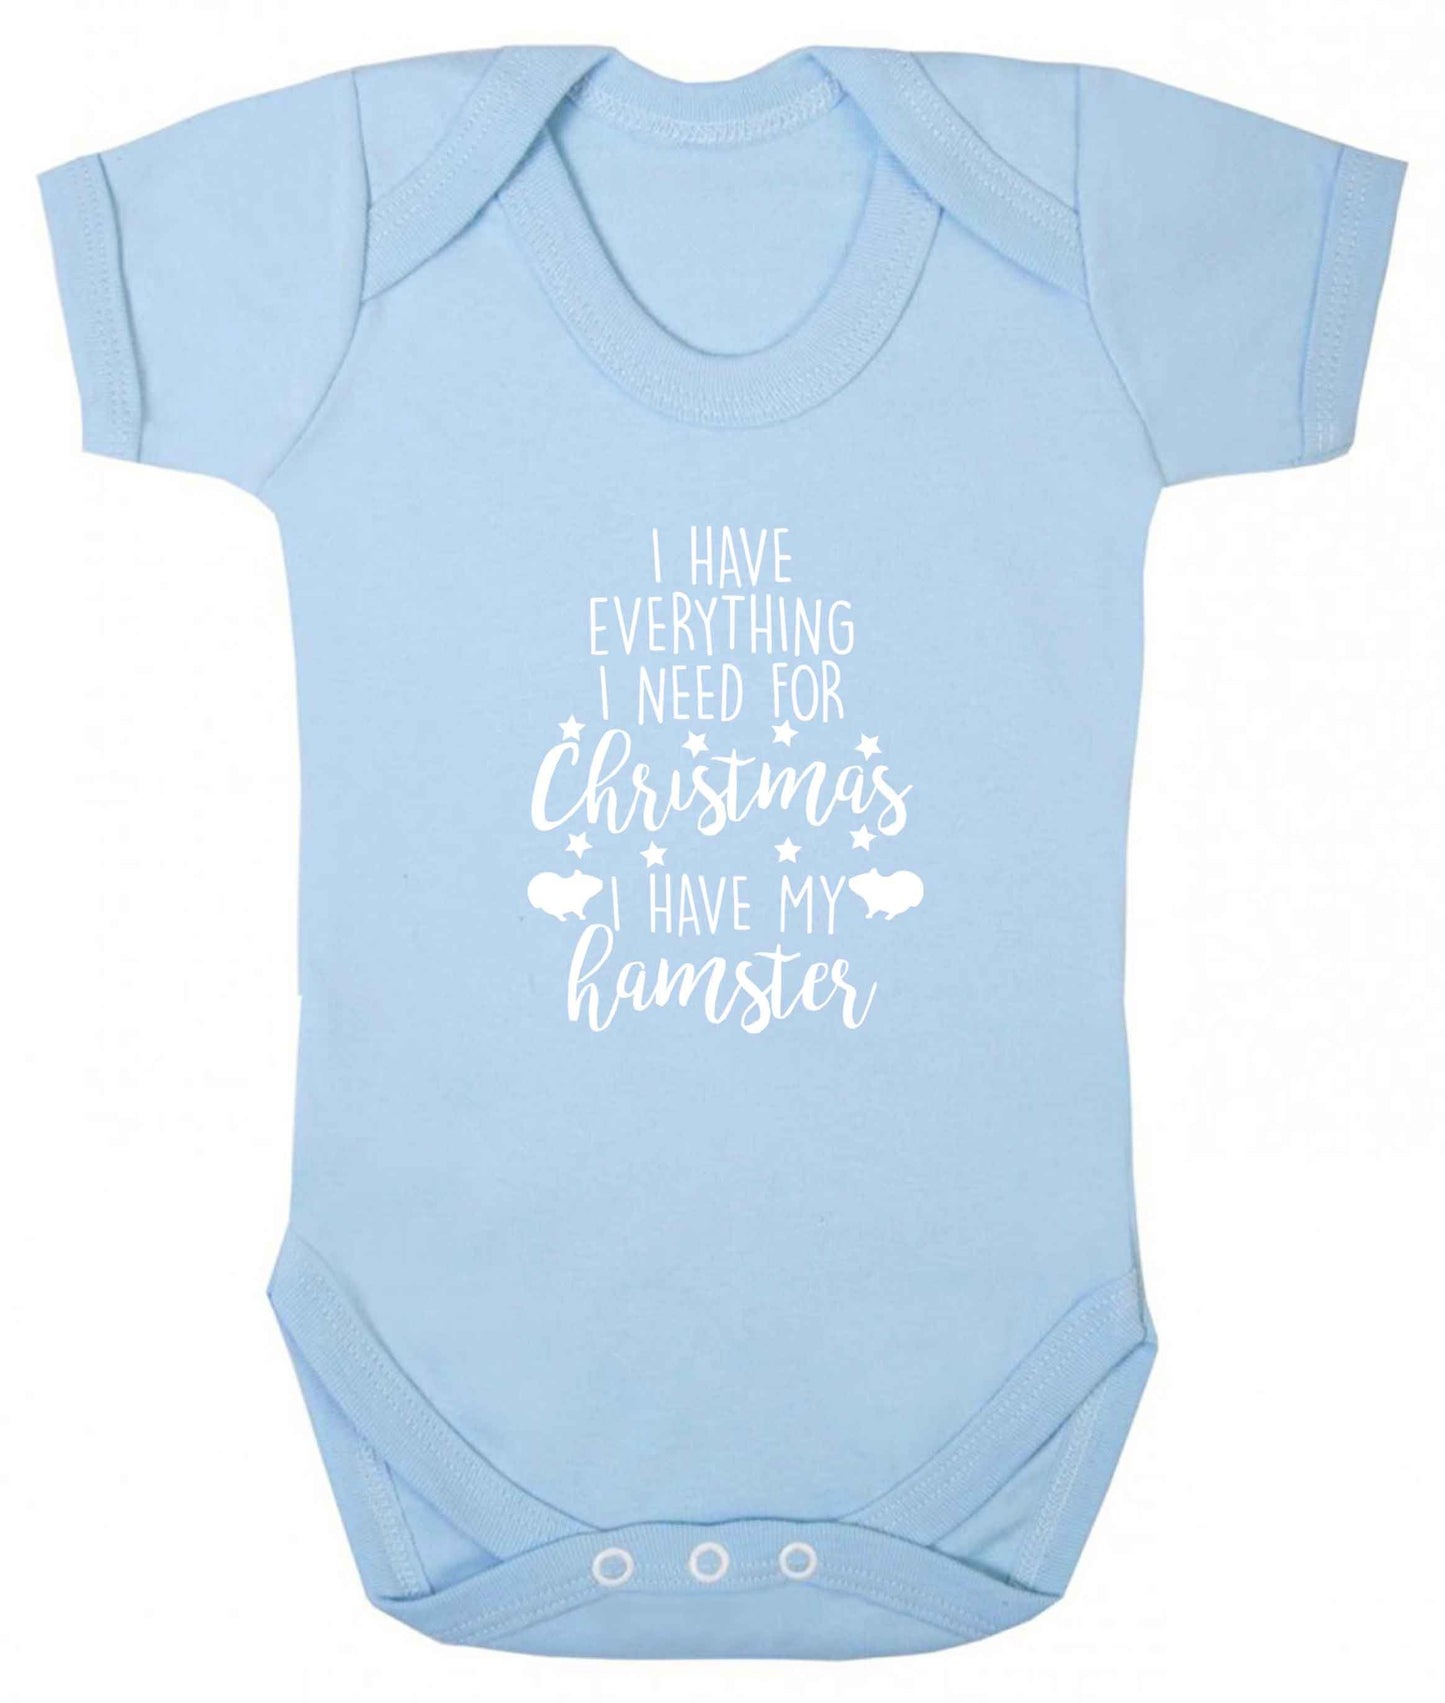 I have everything I need for Christmas I have my hamster baby vest pale blue 18-24 months